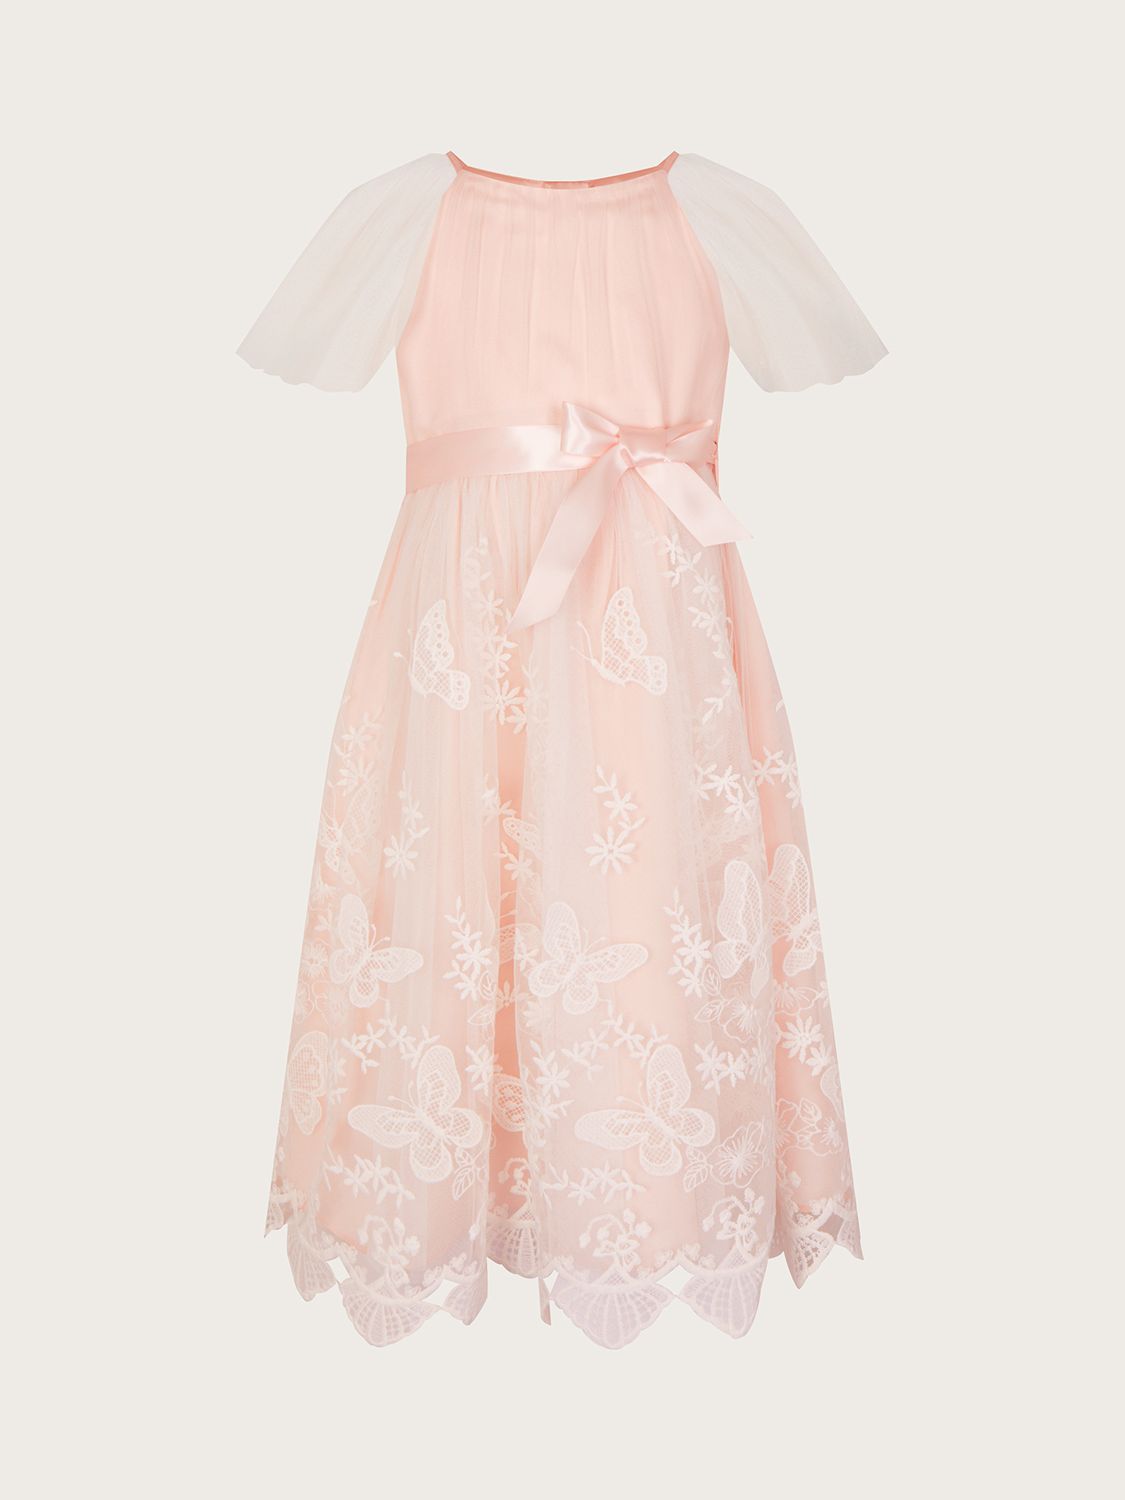 Monsoon Kids' May Butterfly Lace Border Dress, Pink at John Lewis ...